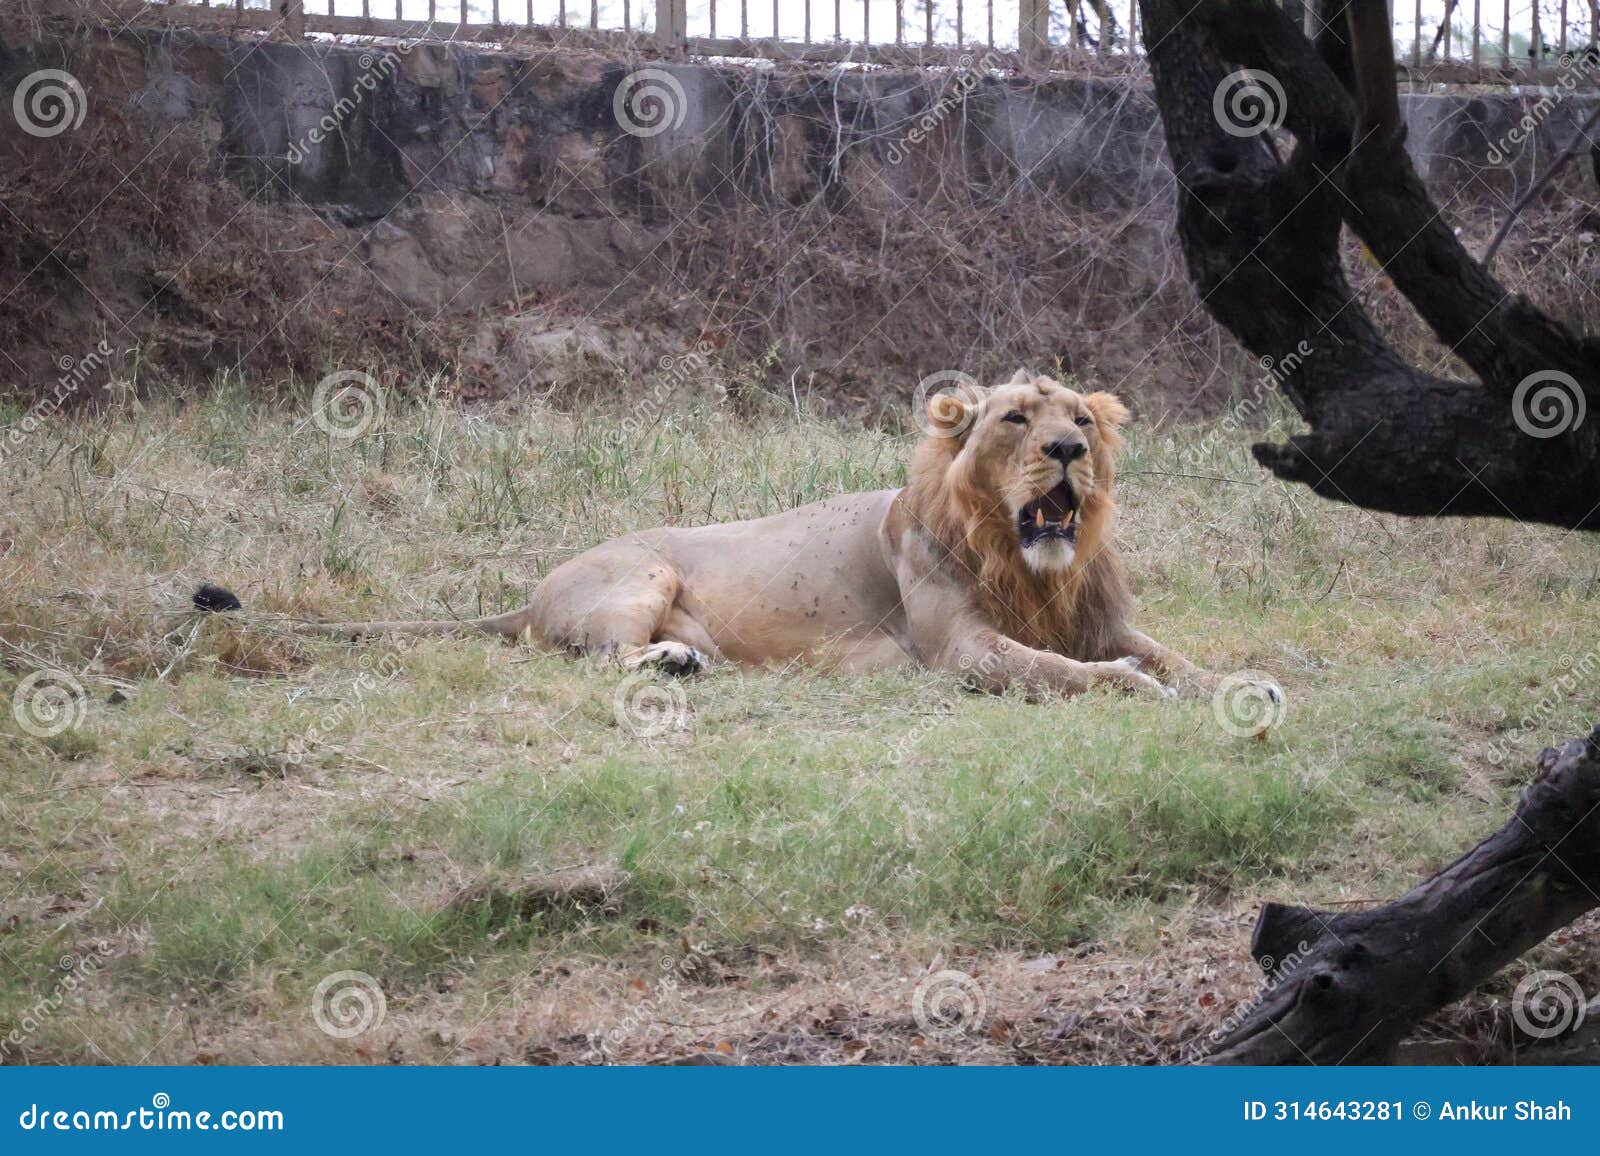 majestic lion relaxing in broad daylight at delhi zoological park india